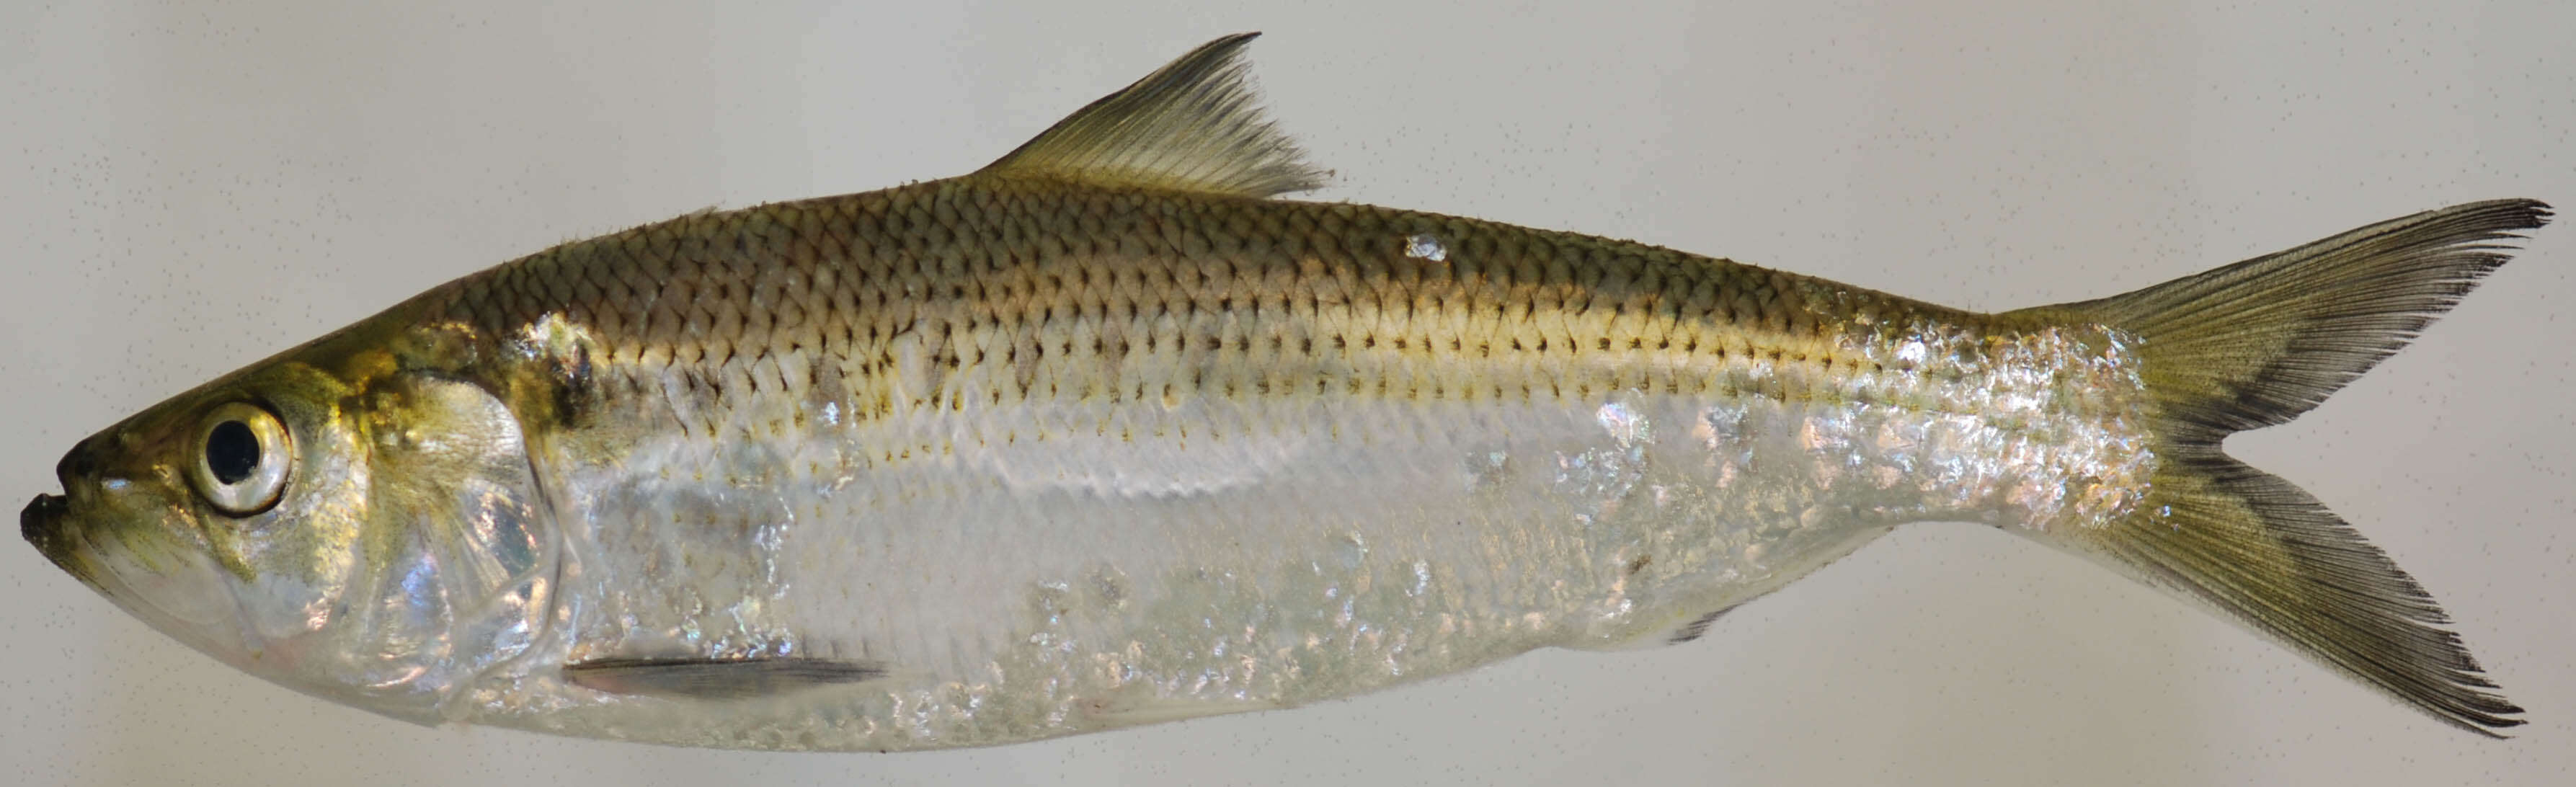 Image of Hickory Shad